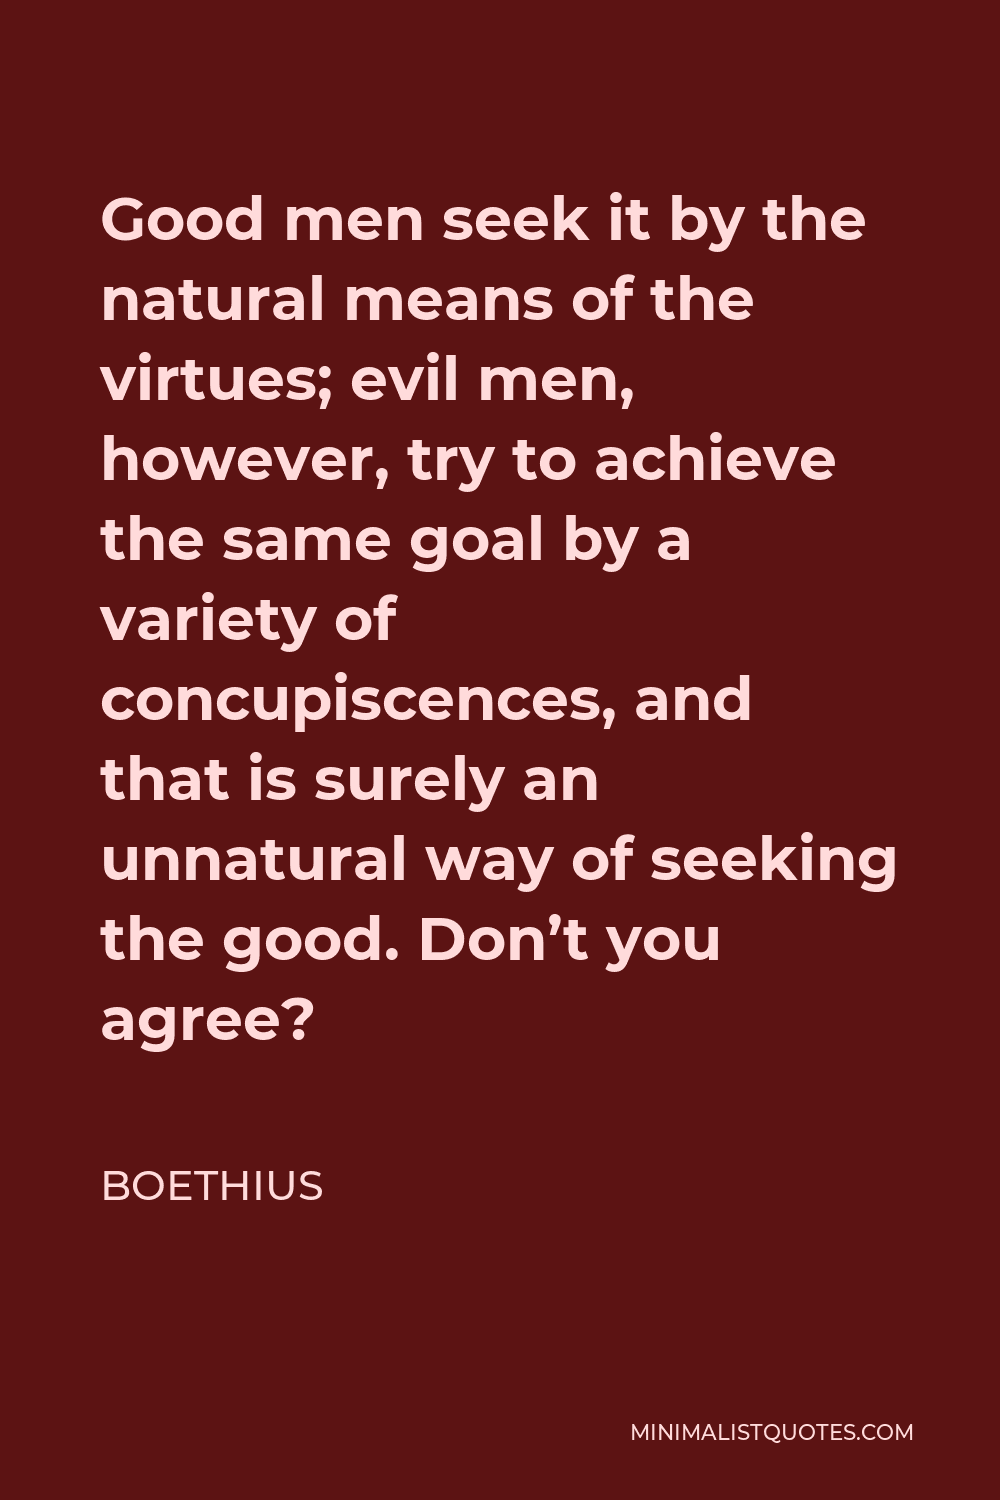 Boethius Quote - Good men seek it by the natural means of the virtues; evil men, however, try to achieve the same goal by a variety of concupiscences, and that is surely an unnatural way of seeking the good. Don’t you agree?